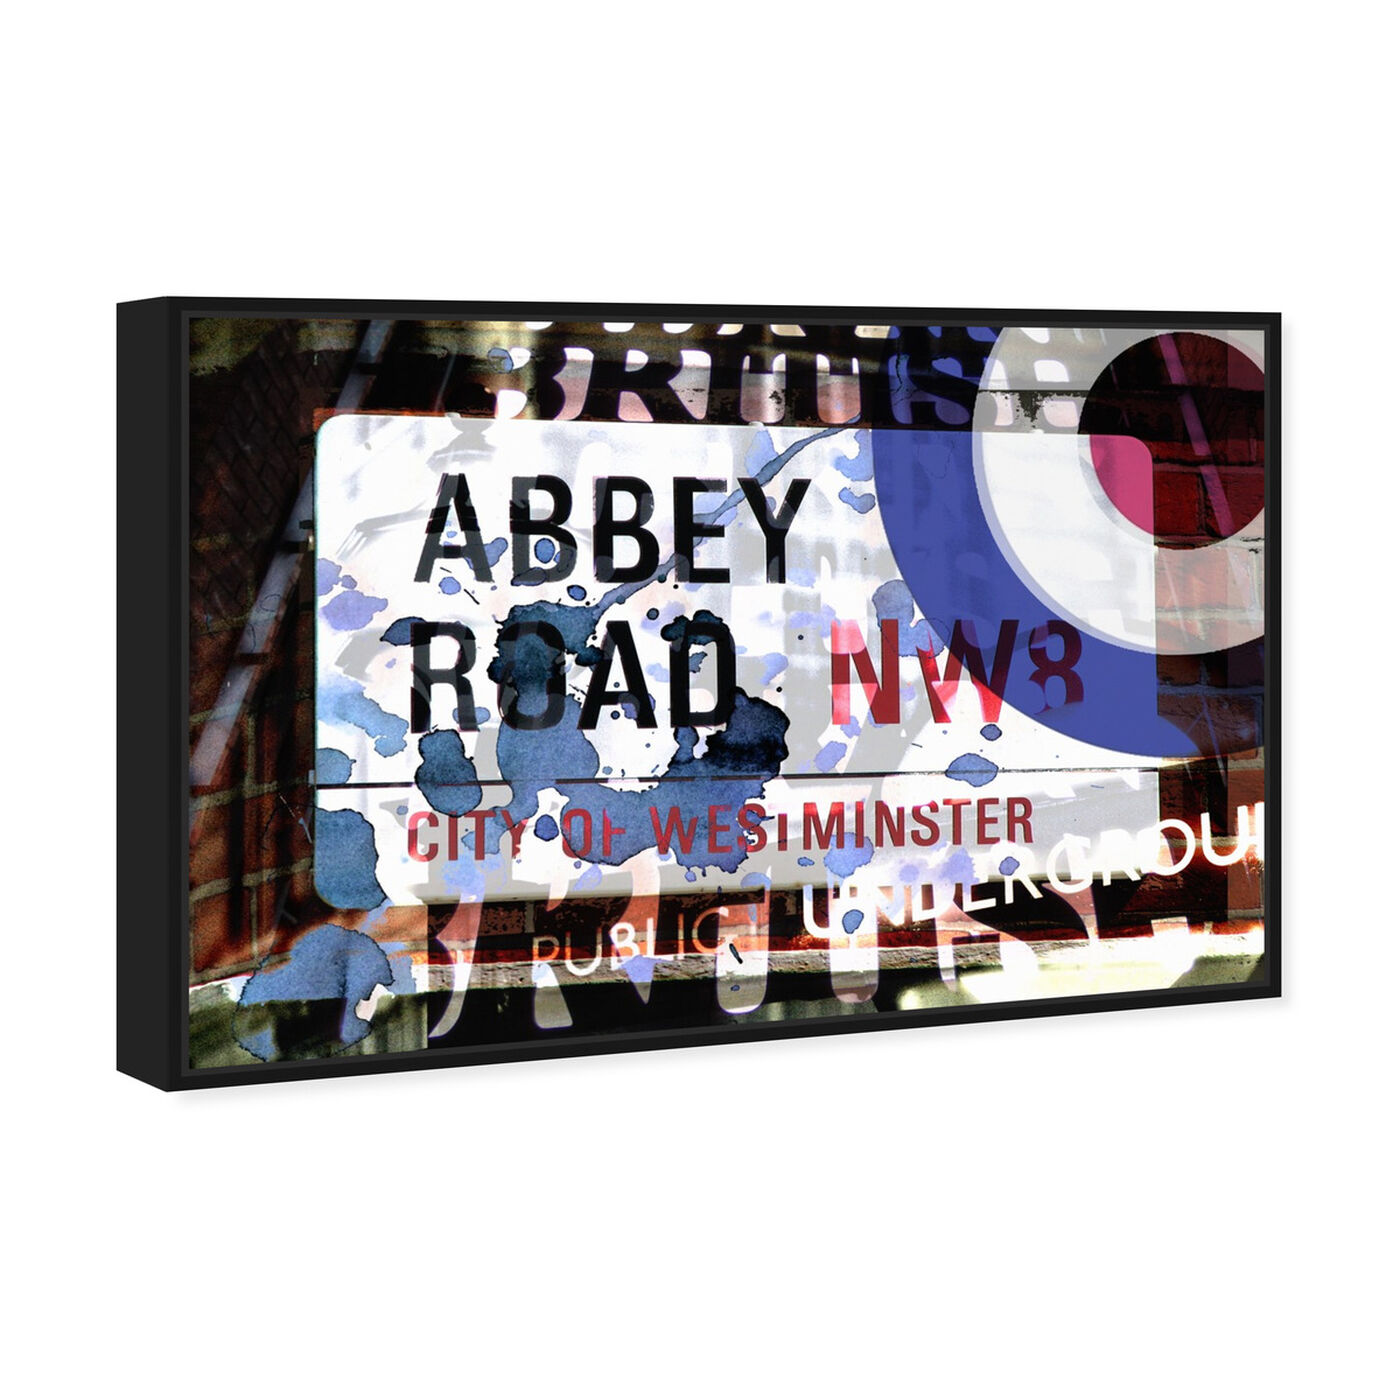 Angled view of Abbey Road featuring advertising and posters art.